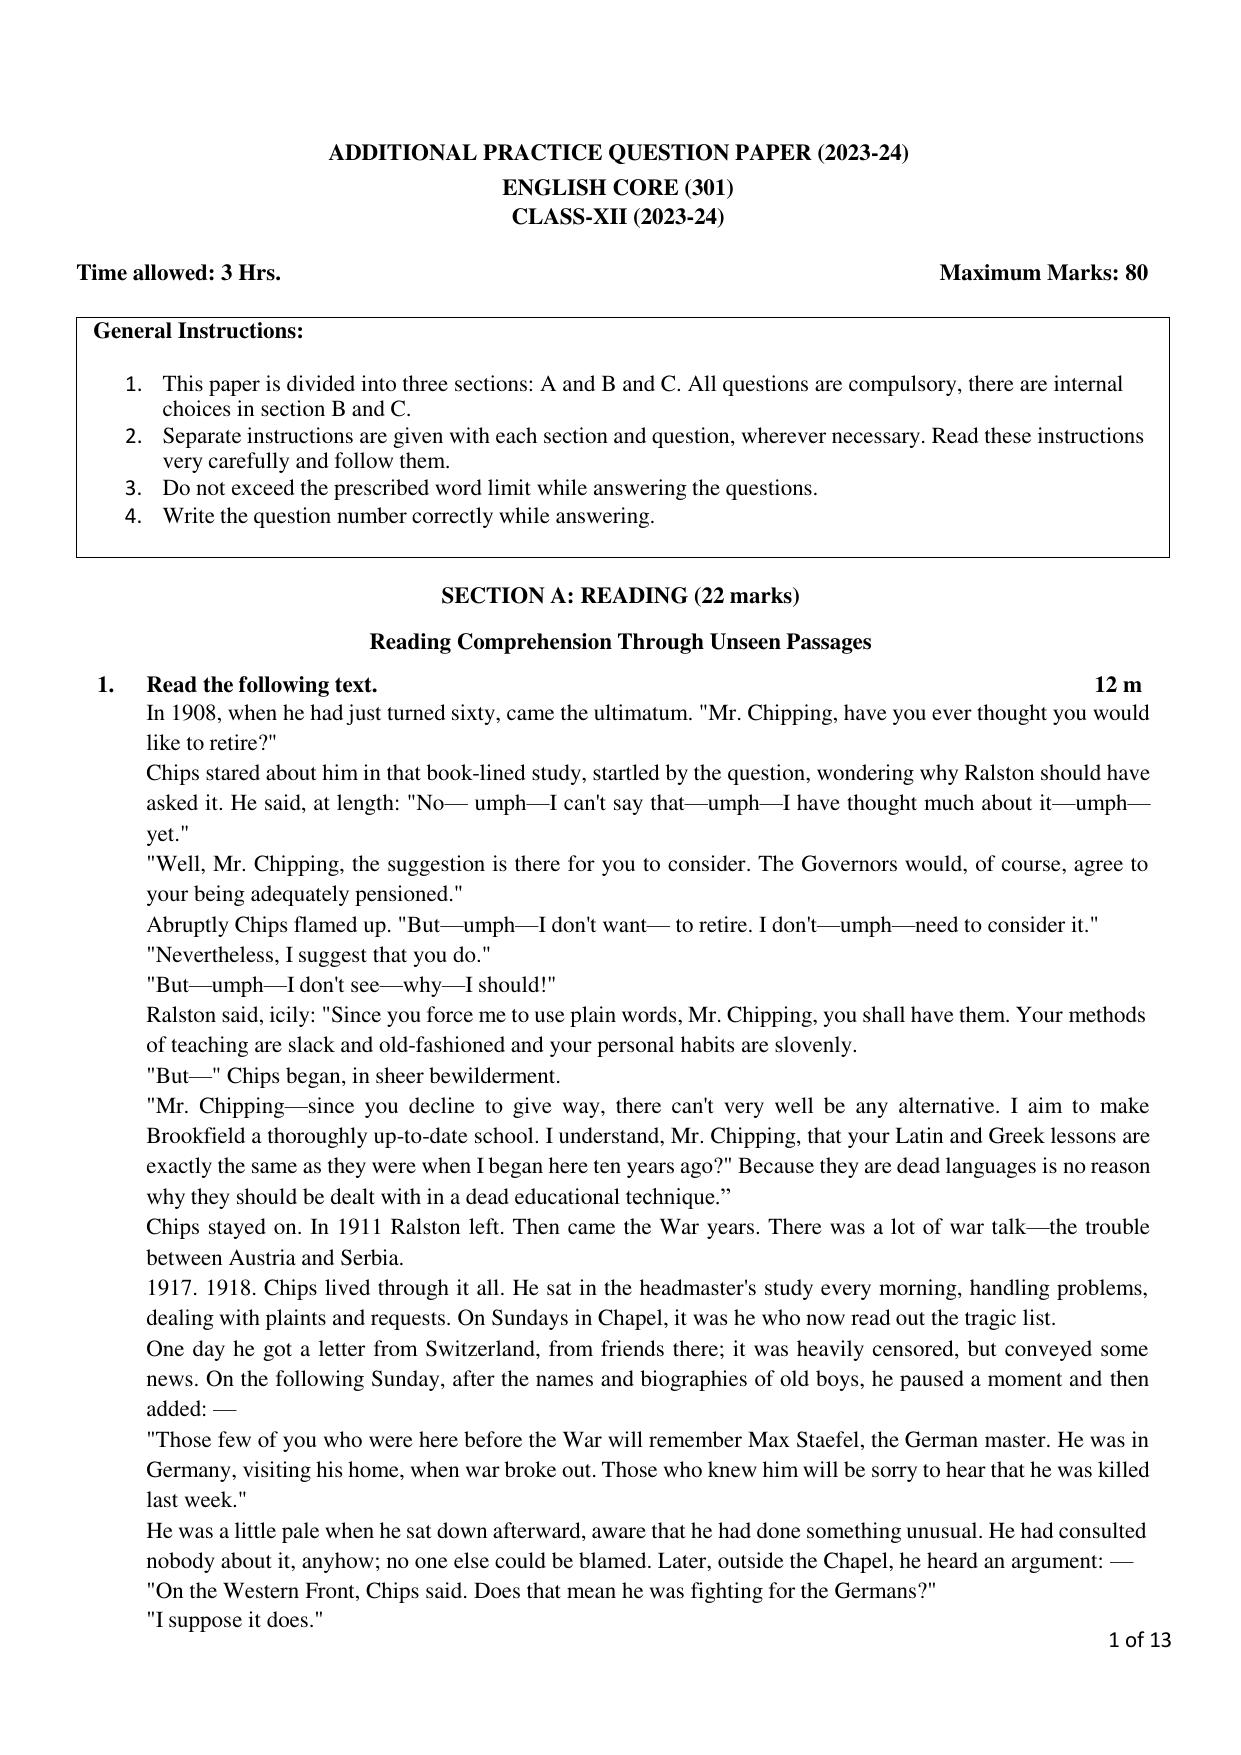 CBSE Class 12 English Core SET 2 Practice Questions 2023-24  - Page 1